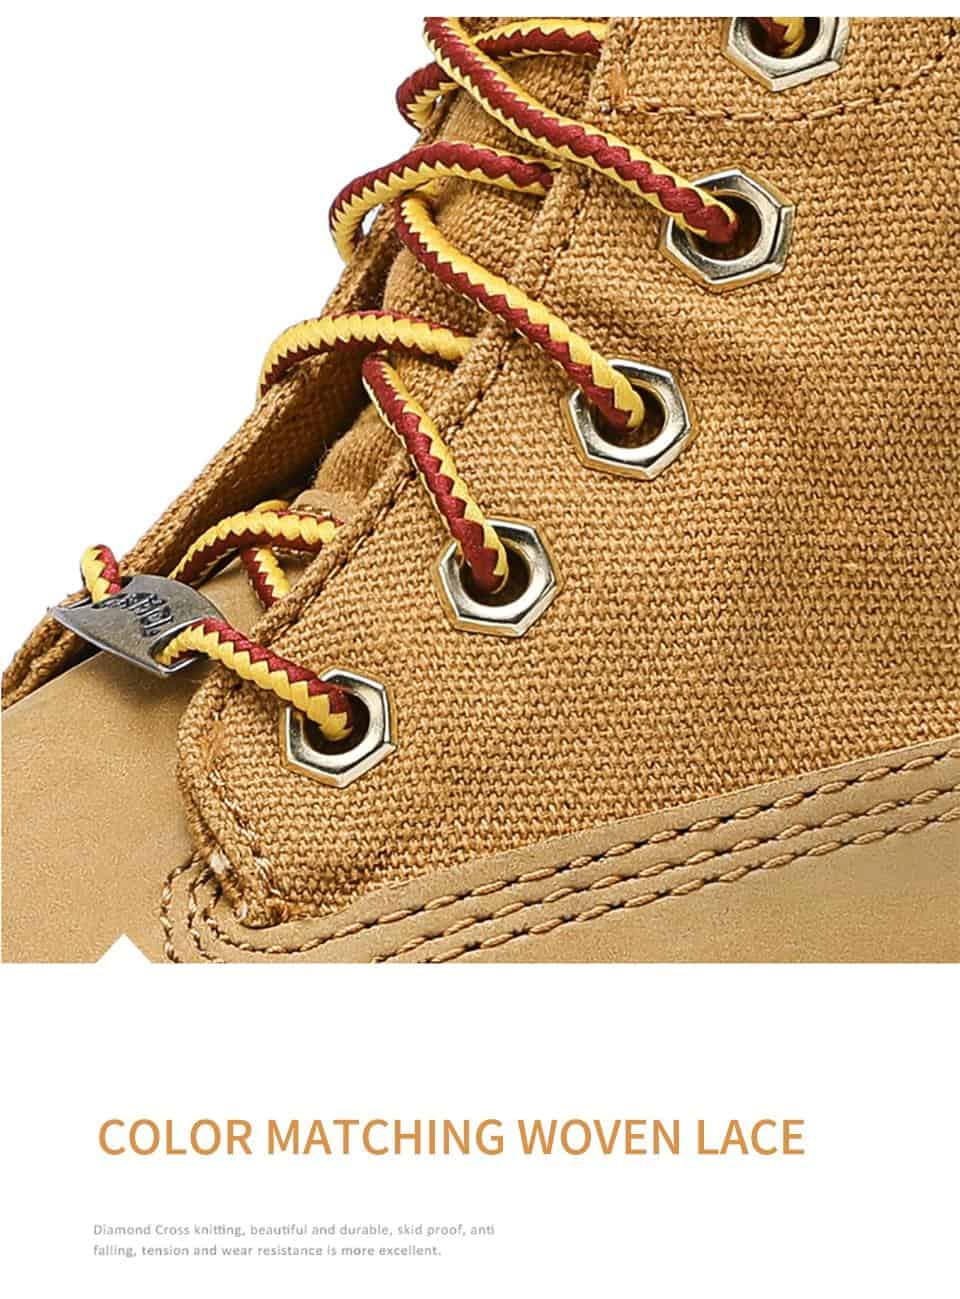 CAMEL New Men Winter Boots Male Wild Tooling Ankle Short Boots Genuine Leather Boots Yellow Cuffed Double Use Fashion Men Shoes